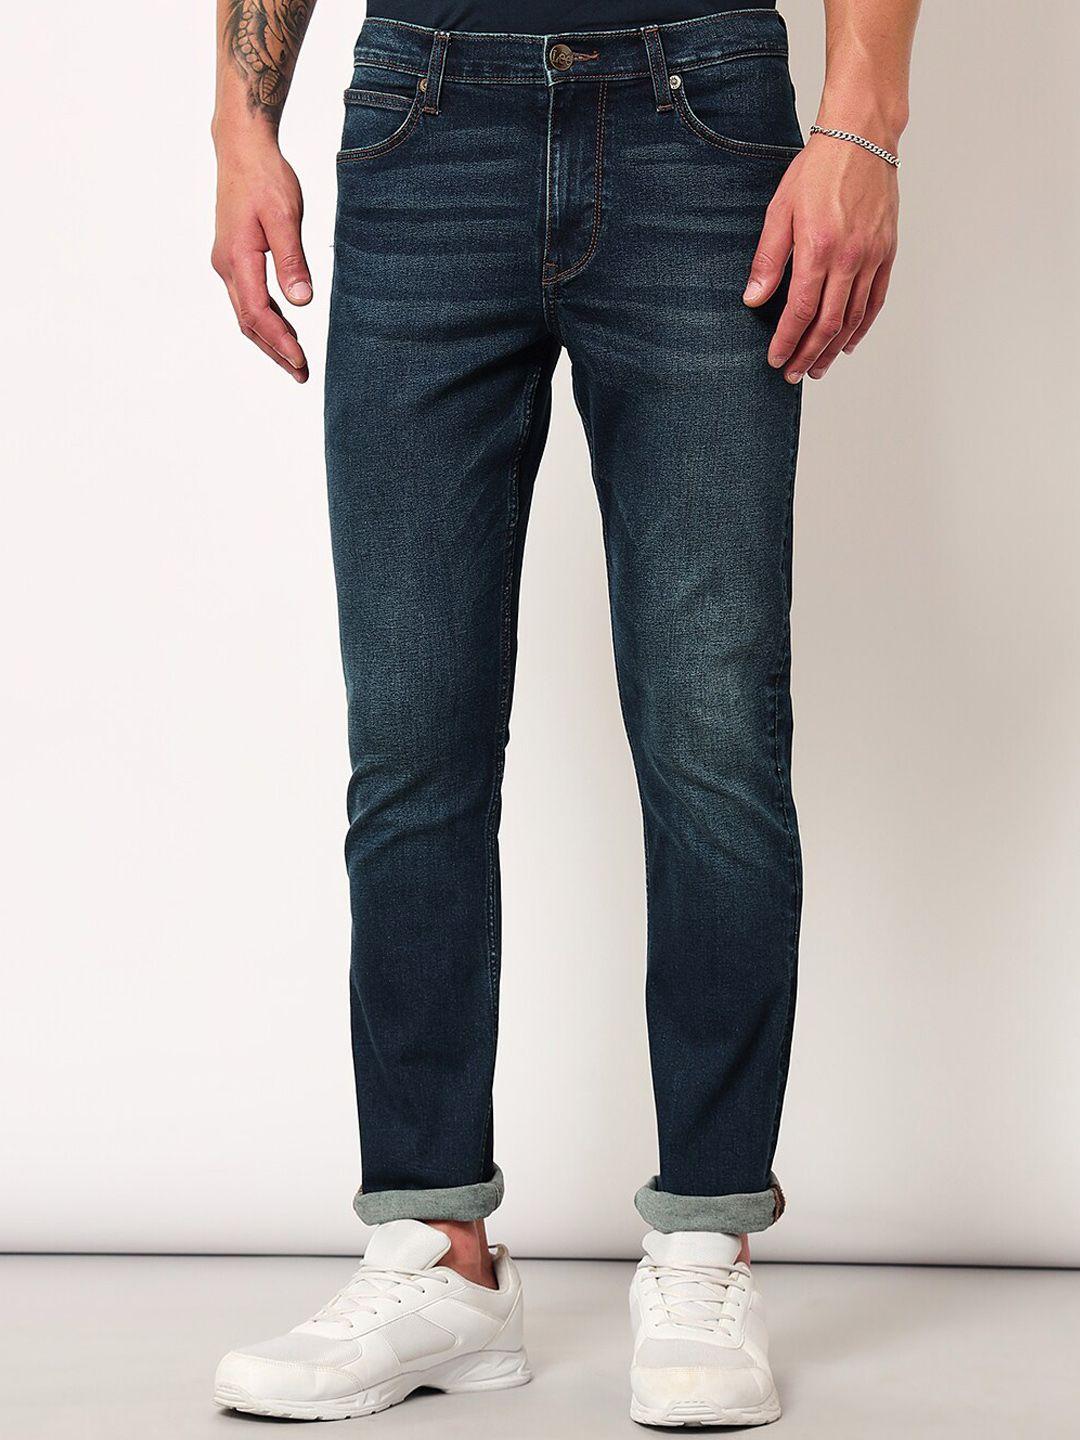 lee-men-rodeo-mid-rise-clean-look-light-fade-stretchable-jeans